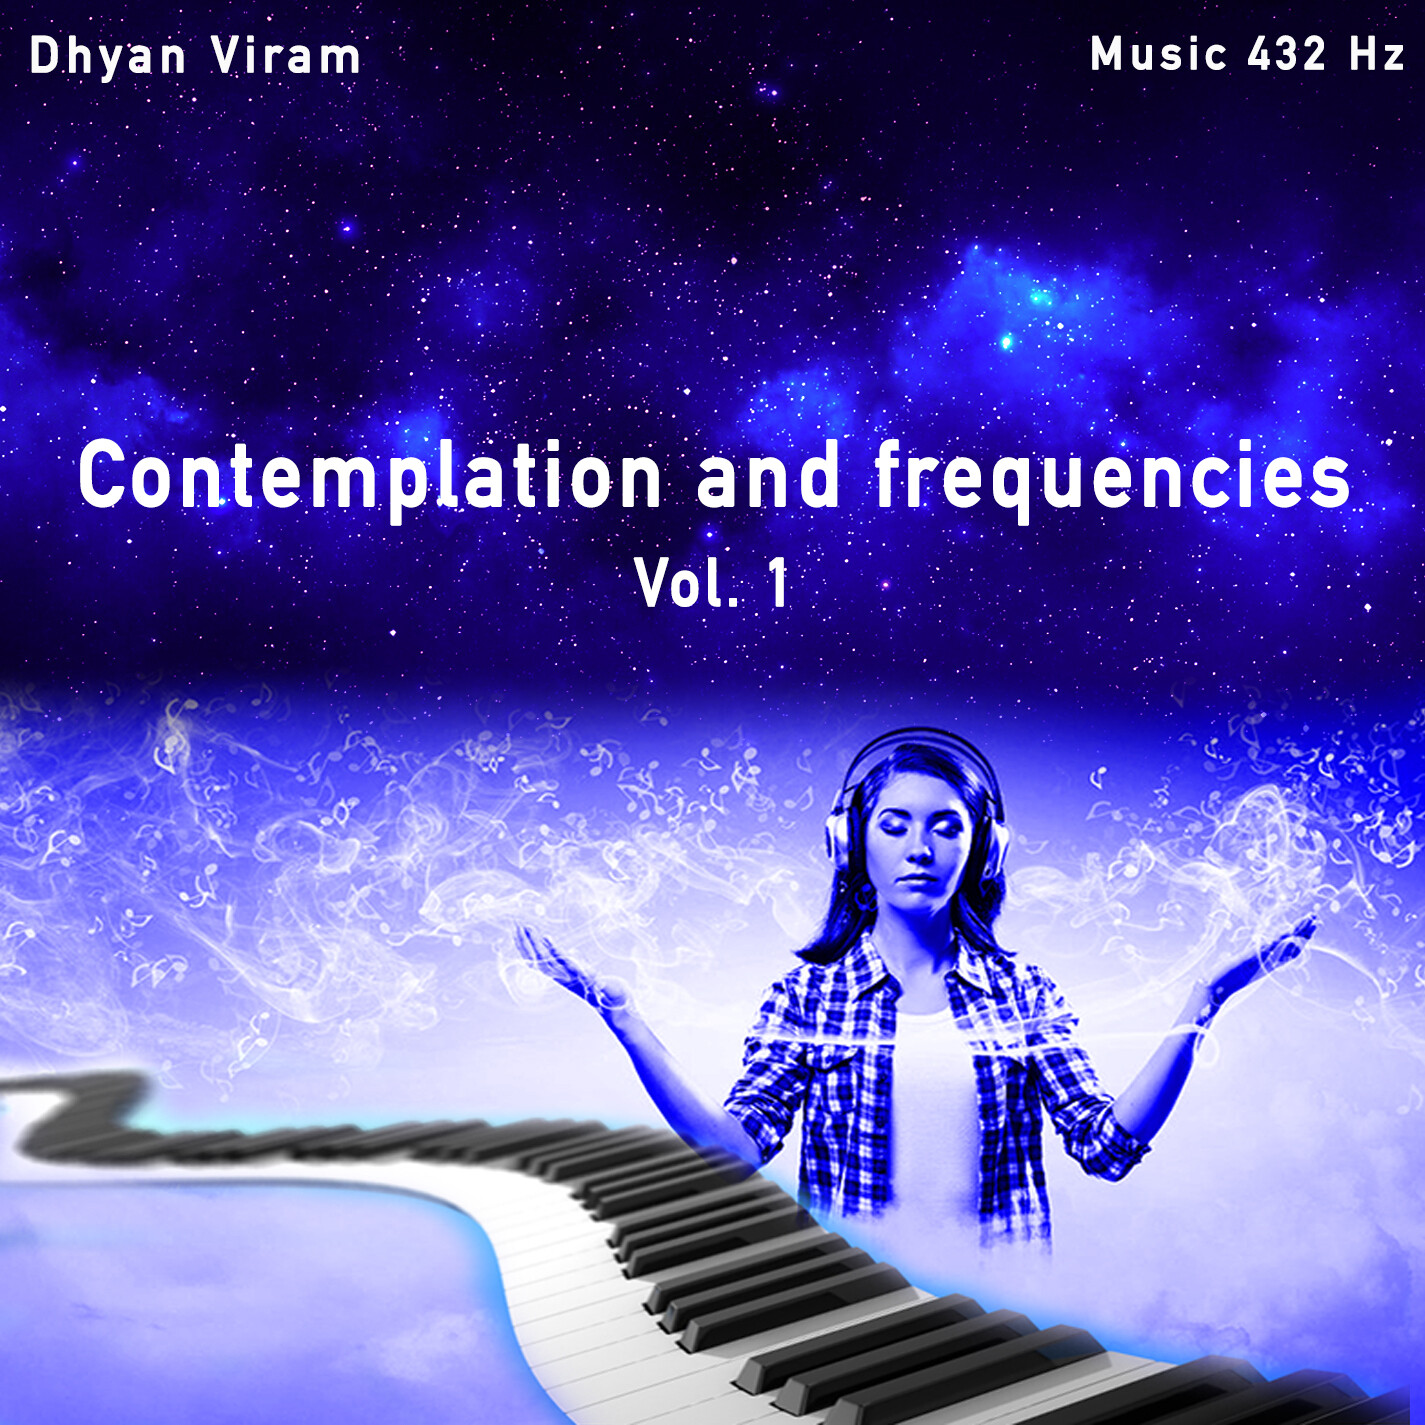 Contemplation and frequencies vol. 1